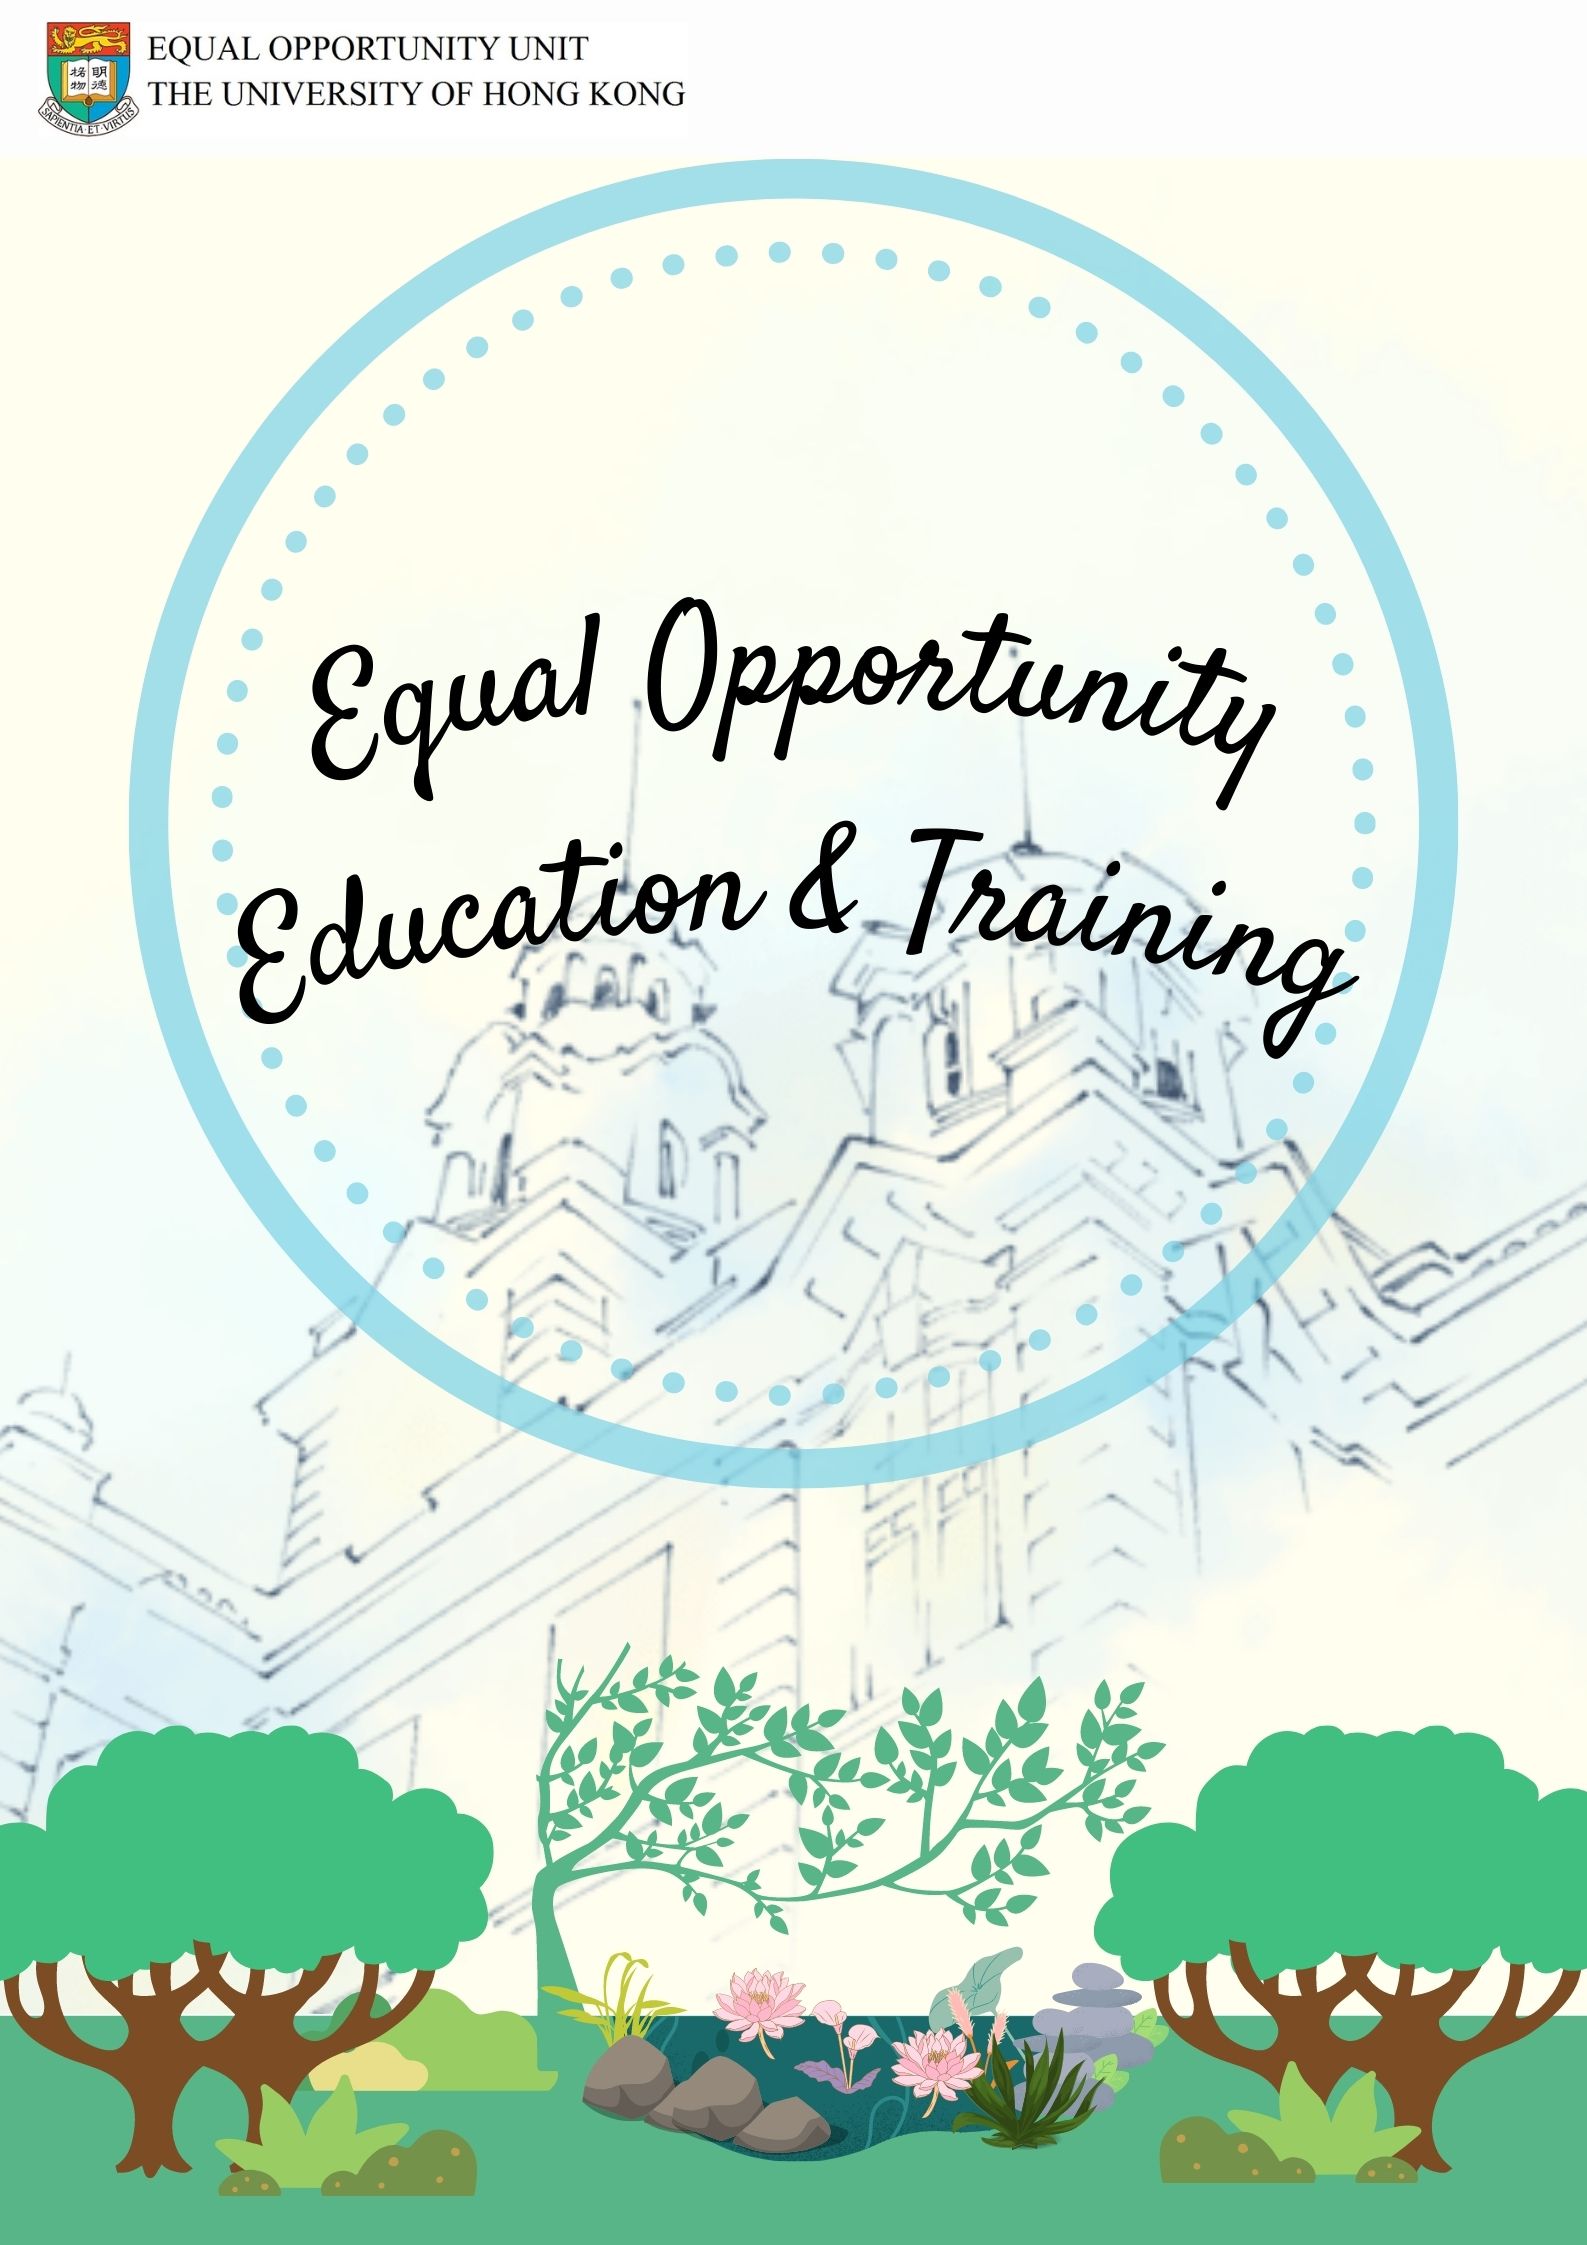 Talk on promoting equal opportunities and preventing harassment for New College Orientation 2020 Poster. Content same as text on this webpage.